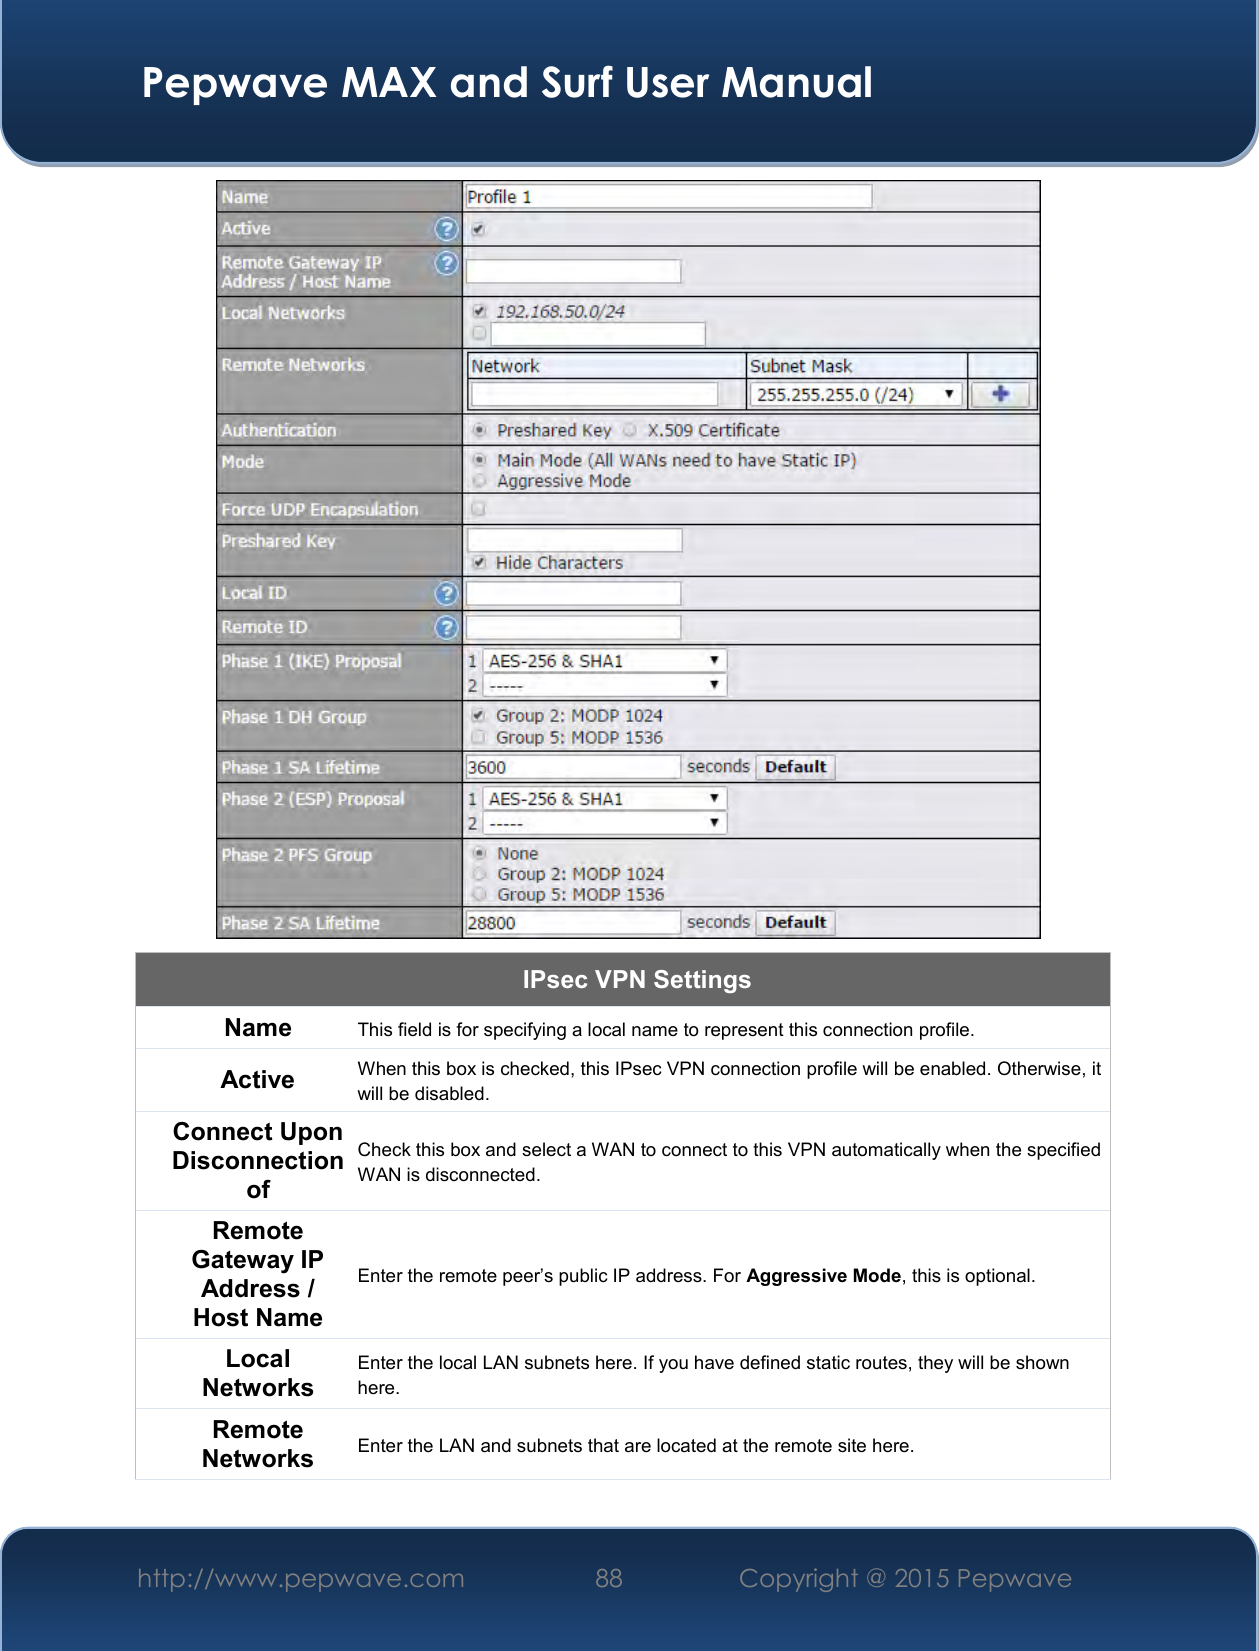  Pepwave MAX and Surf User Manual http://www.pepwave.com 88   Copyright @ 2015 Pepwave    IPsec VPN Settings Name This field is for specifying a local name to represent this connection profile.  Active When this box is checked, this IPsec VPN connection profile will be enabled. Otherwise, it will be disabled. Connect Upon Disconnection of Check this box and select a WAN to connect to this VPN automatically when the specified WAN is disconnected. Remote Gateway IP Address / Host Name Enter the remote peer’s public IP address. For Aggressive Mode, this is optional. Local Networks Enter the local LAN subnets here. If you have defined static routes, they will be shown here. Remote Networks  Enter the LAN and subnets that are located at the remote site here. 